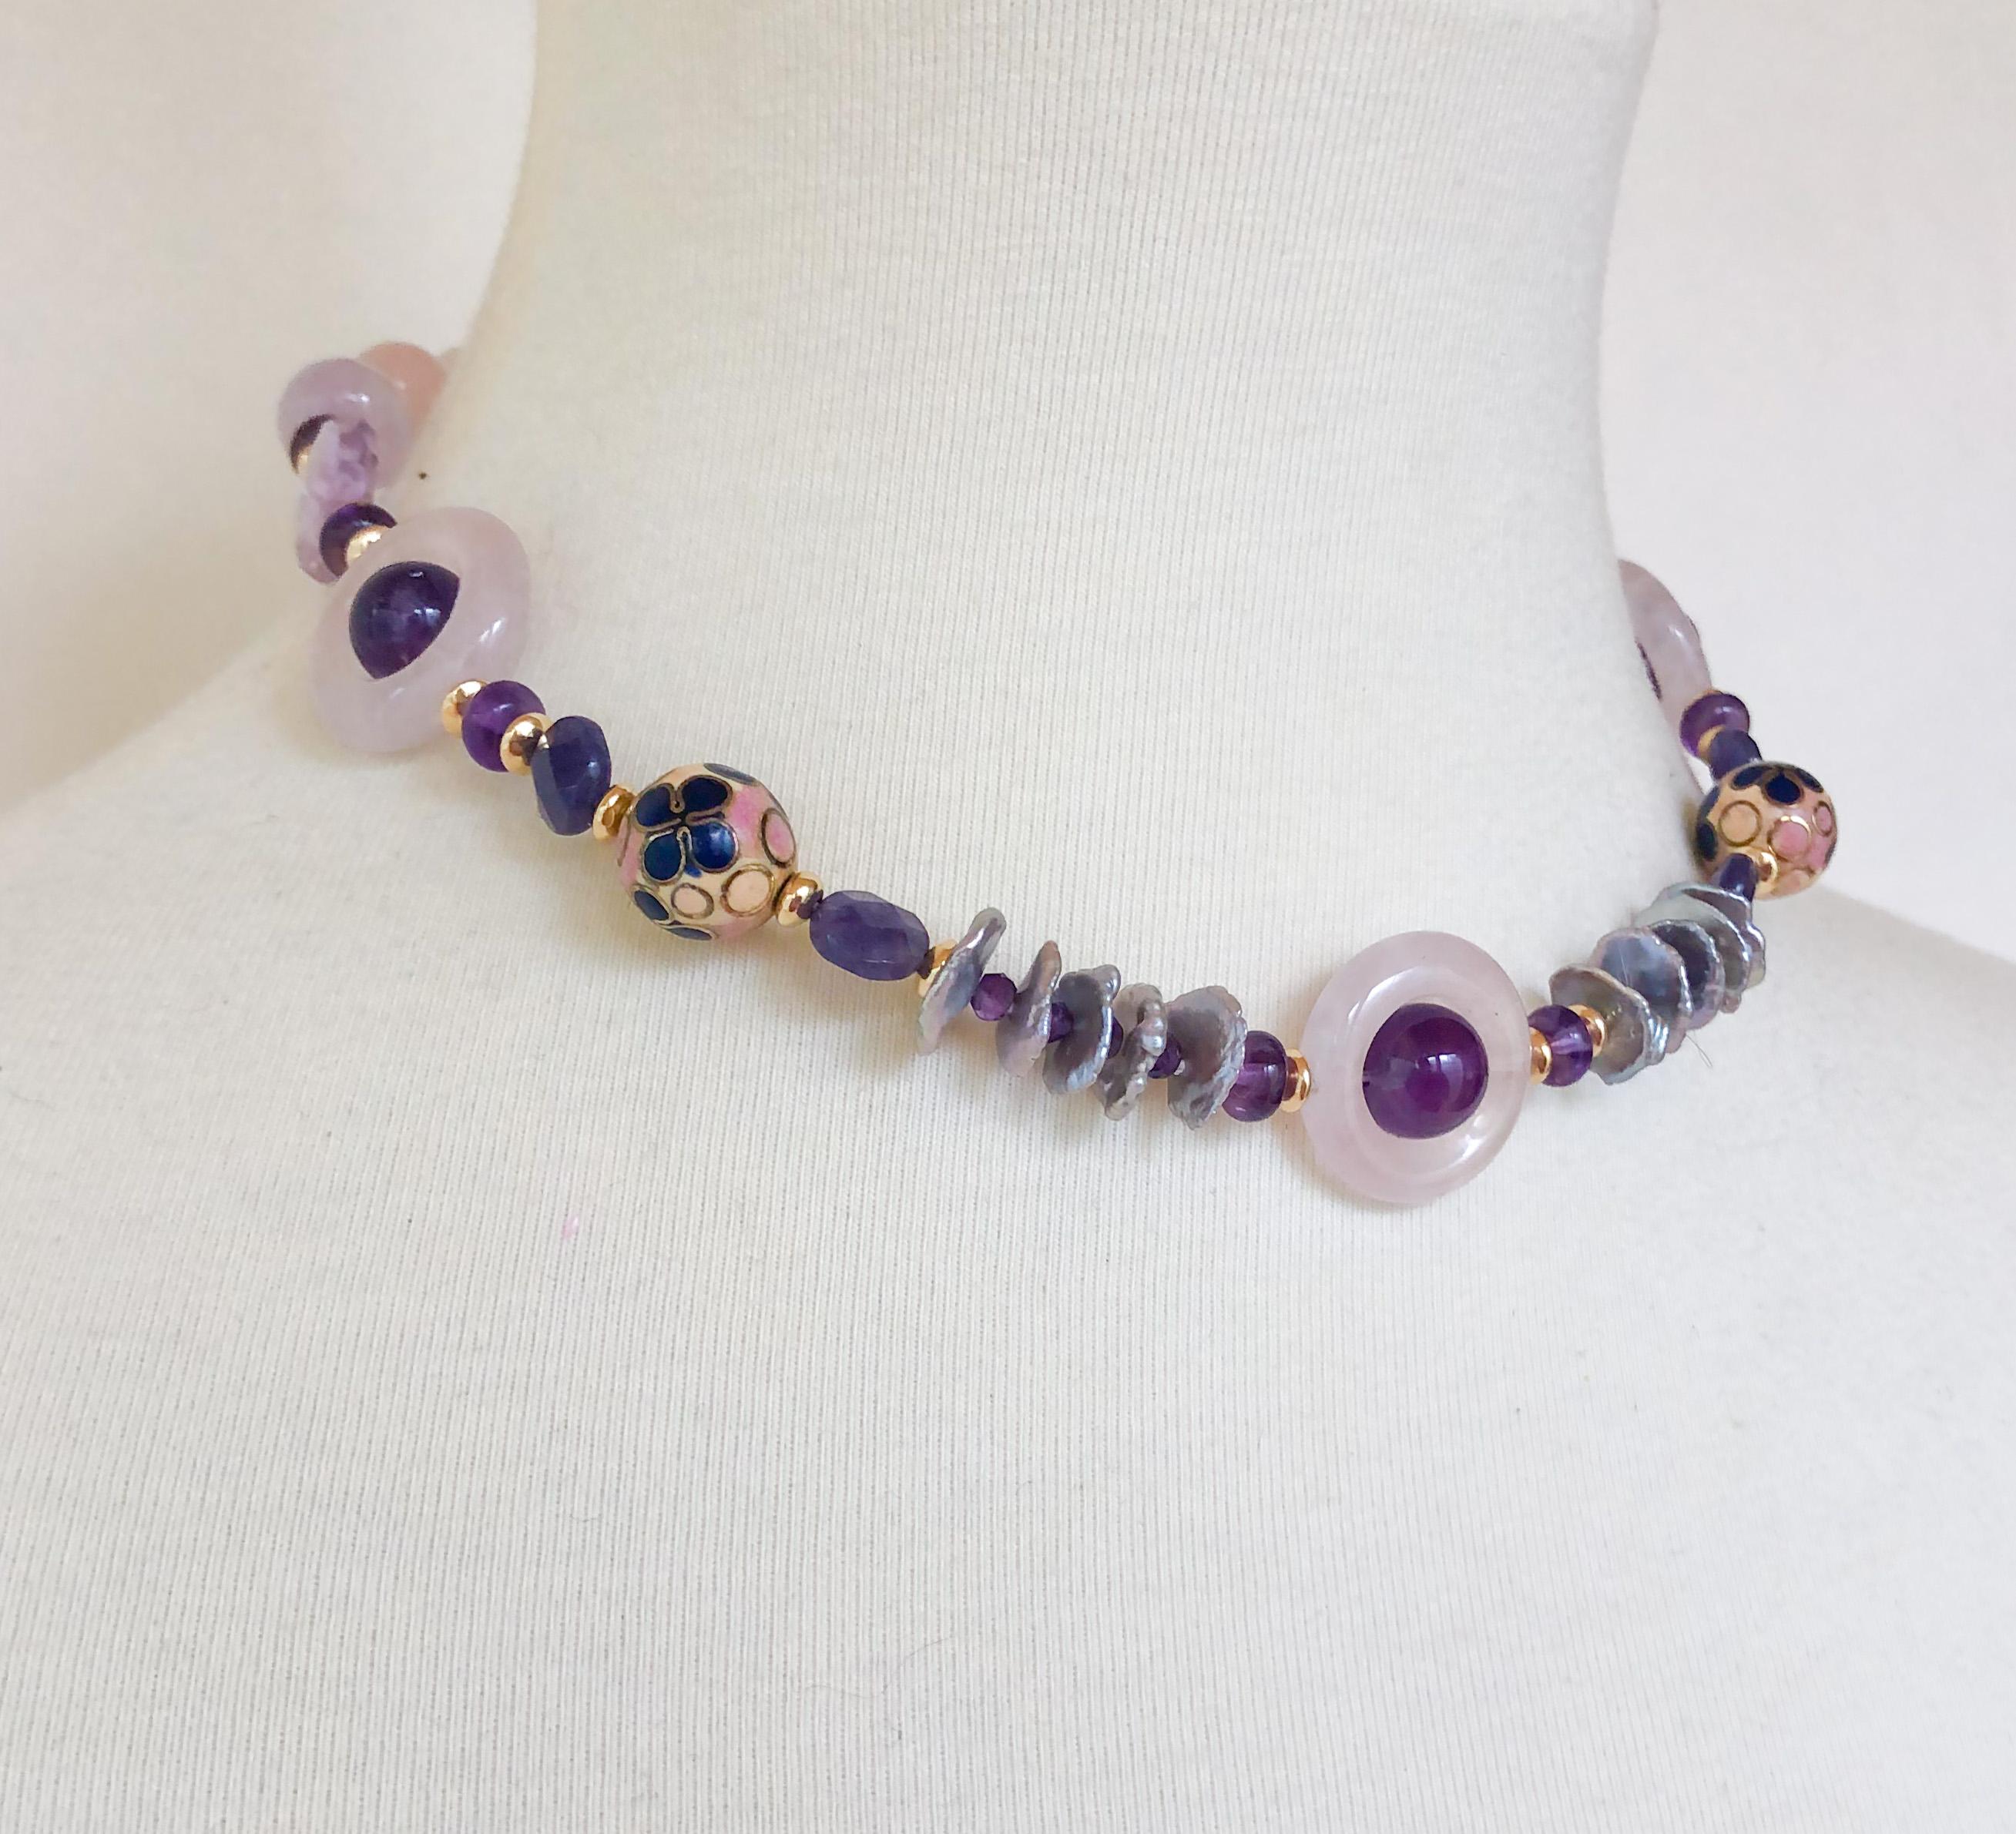 This necklace is made with various shapes and shades of amethyst, as well as rose quartz beads and freshwater graded grey pearls. There are two vintage enamel beads and vermeil gold beads as well. The magnetic clasp is made of vermeil gold, and is